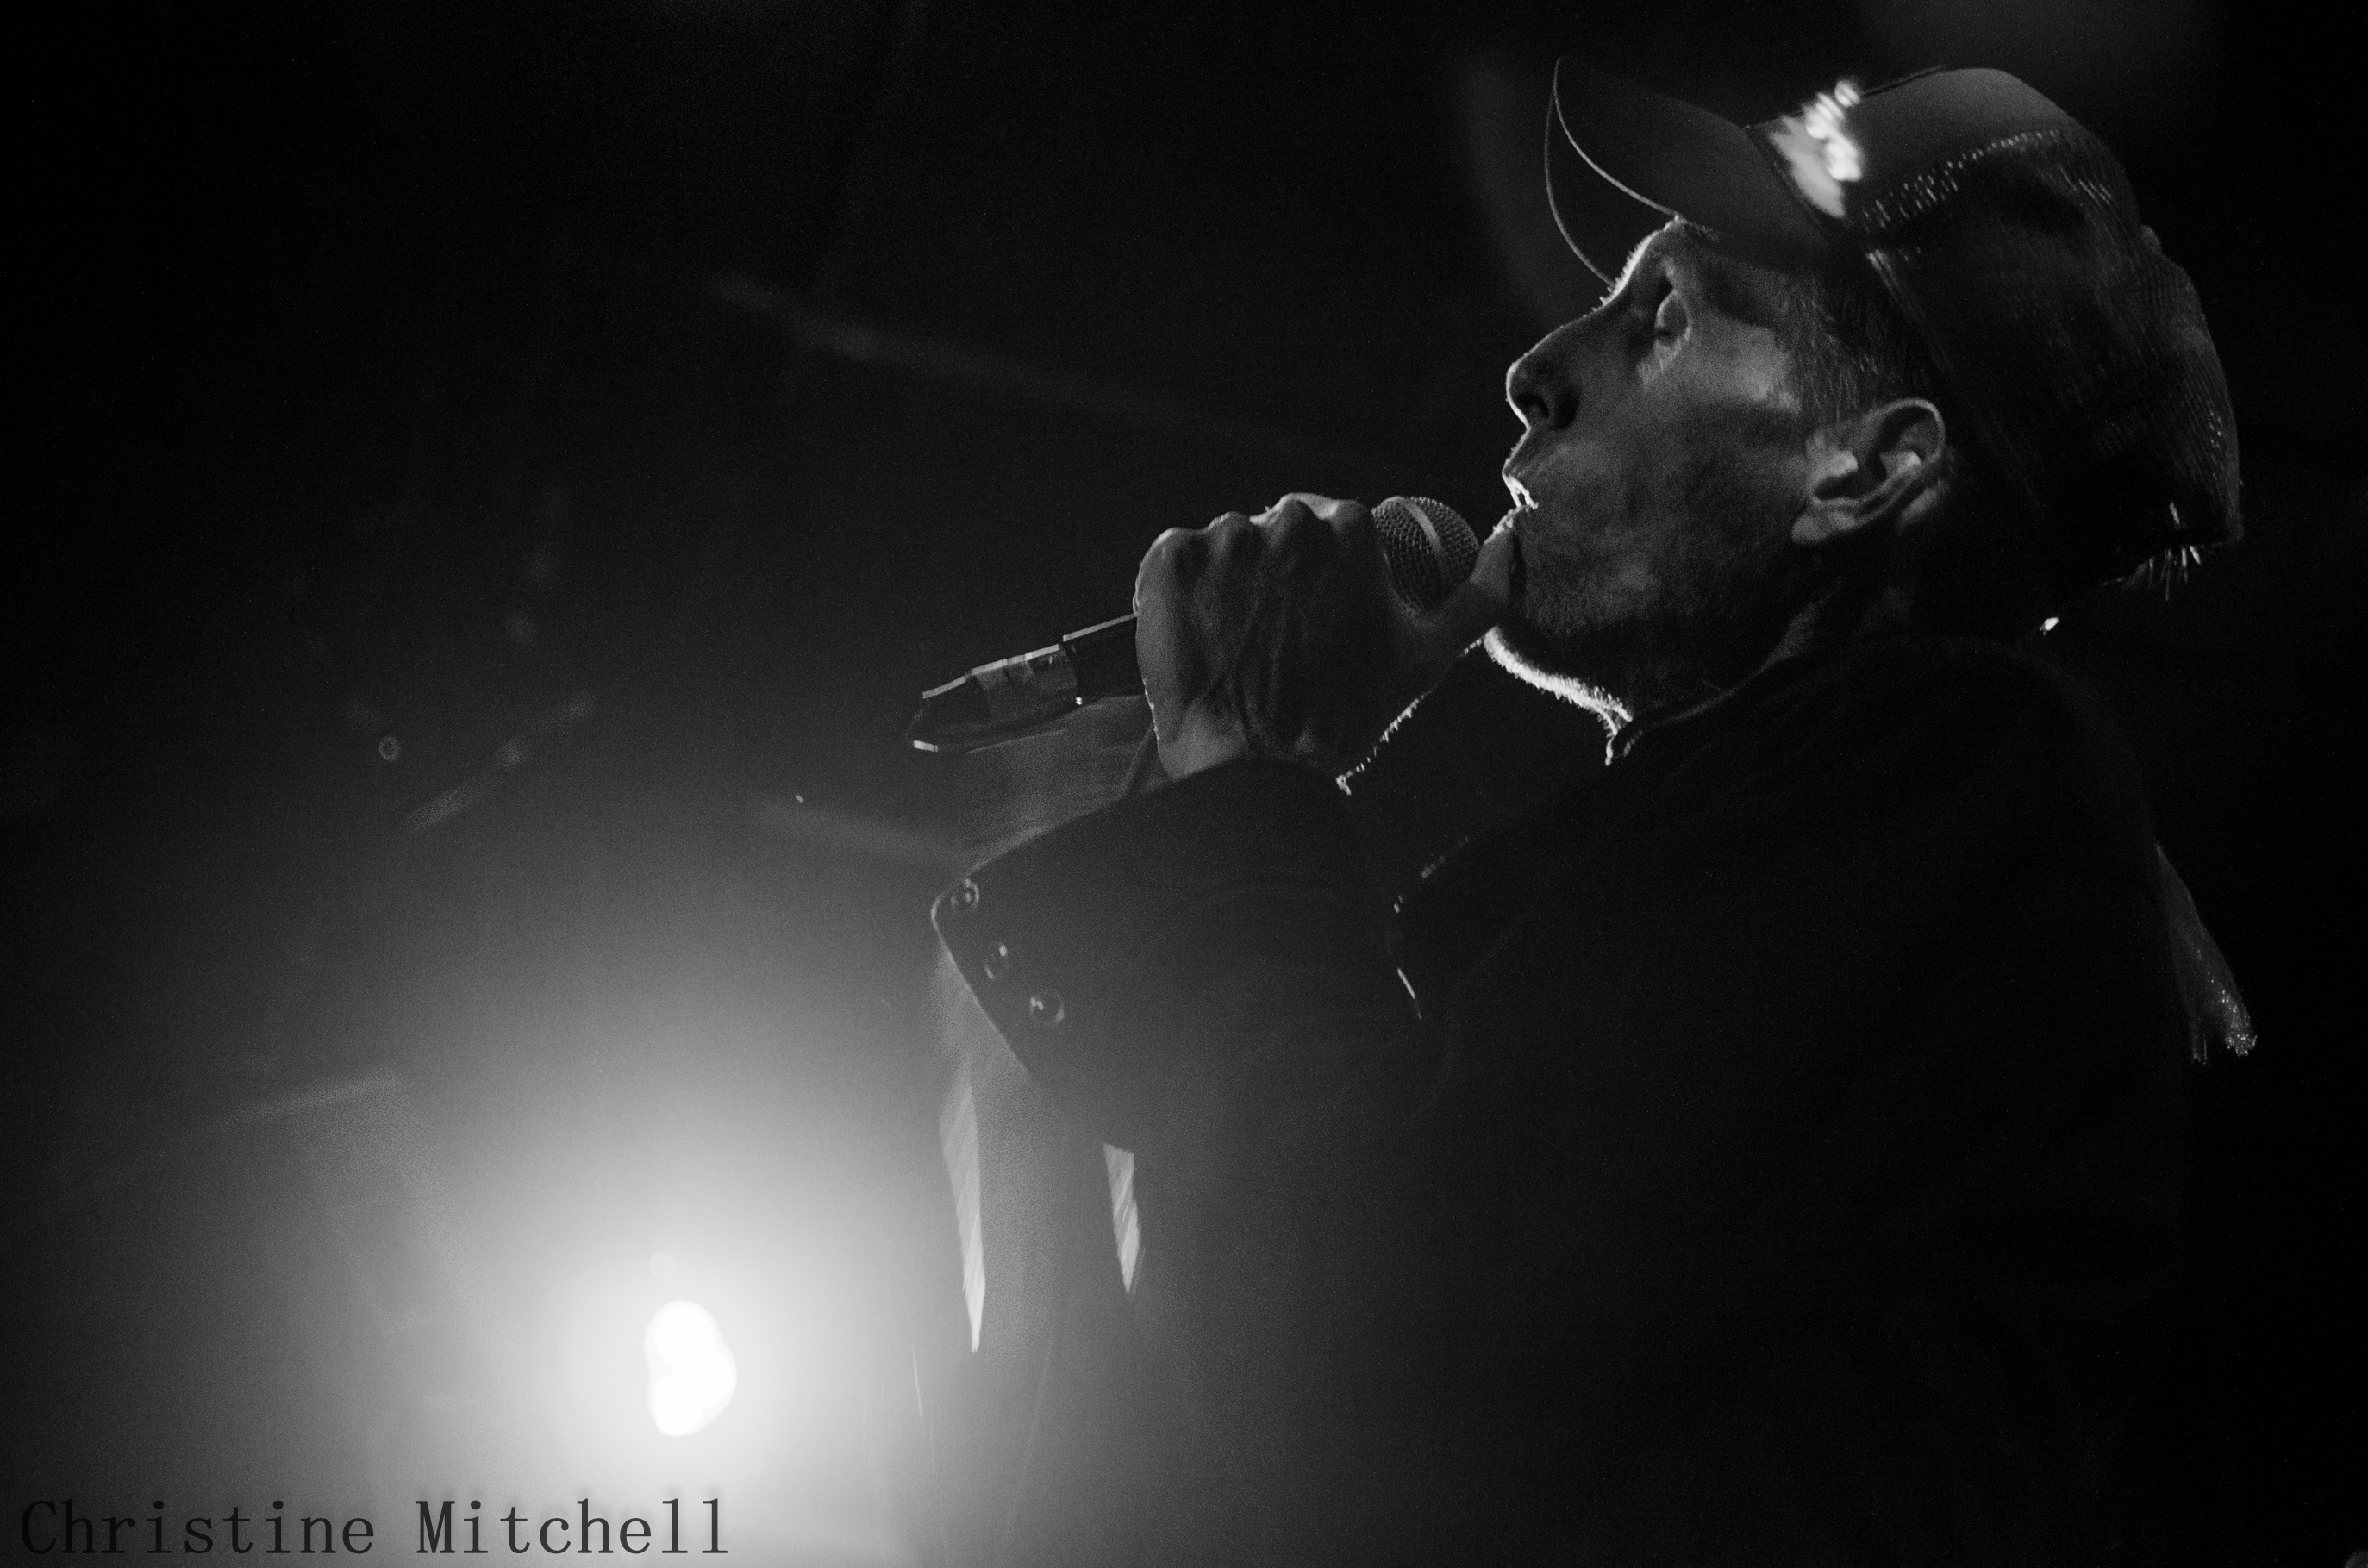 Slim Cessna’s Auto Club at the Tractor Tavern (Photo by Christine Mitchell)